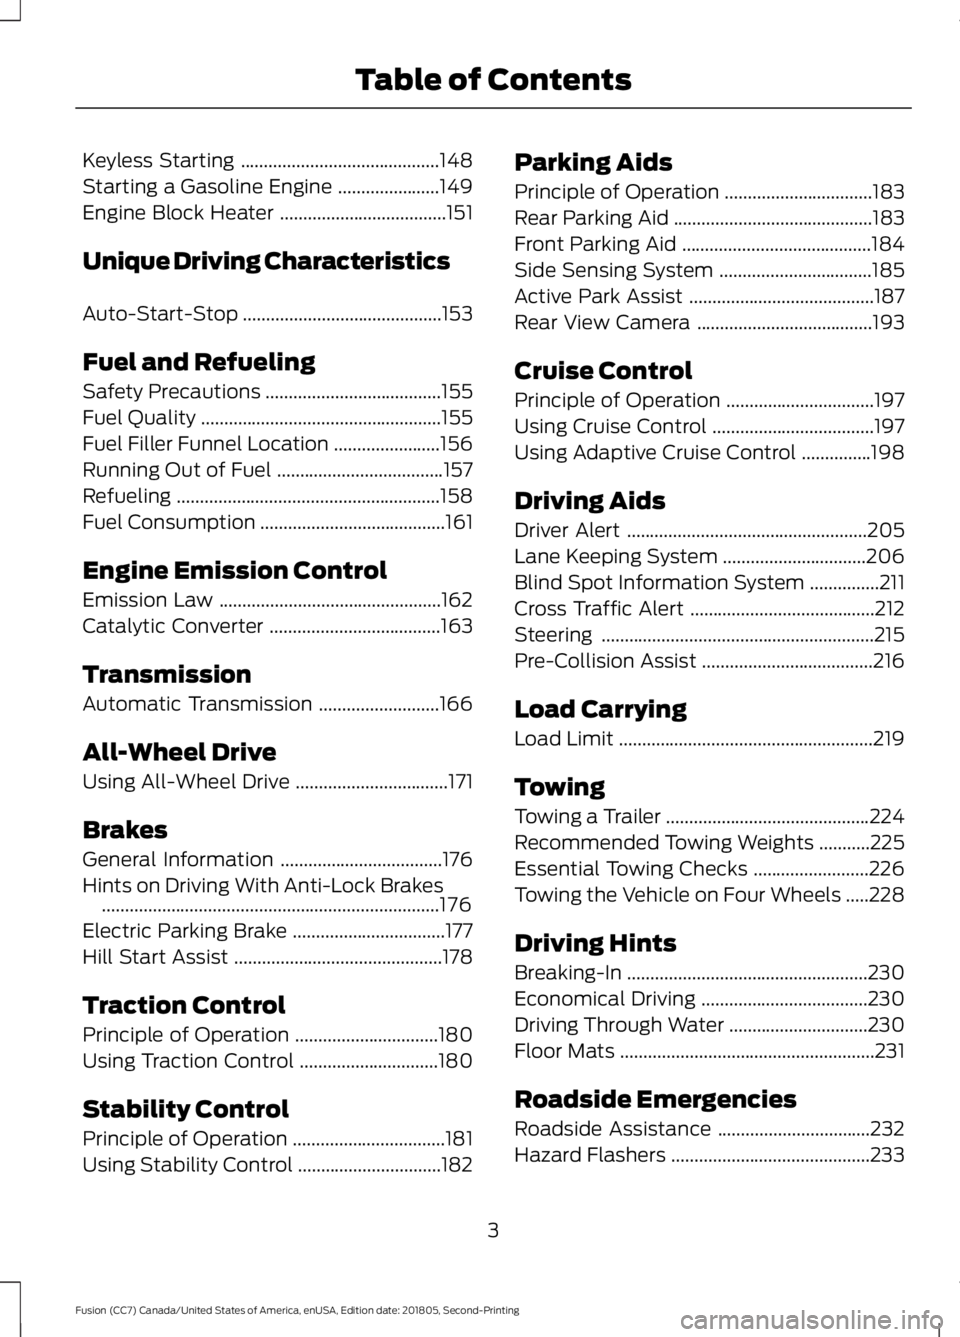 FORD FUSION 2019  Owners Manual Keyless Starting
...........................................148
Starting a Gasoline Engine ......................
149
Engine Block Heater ....................................
151
Unique Driving Charac